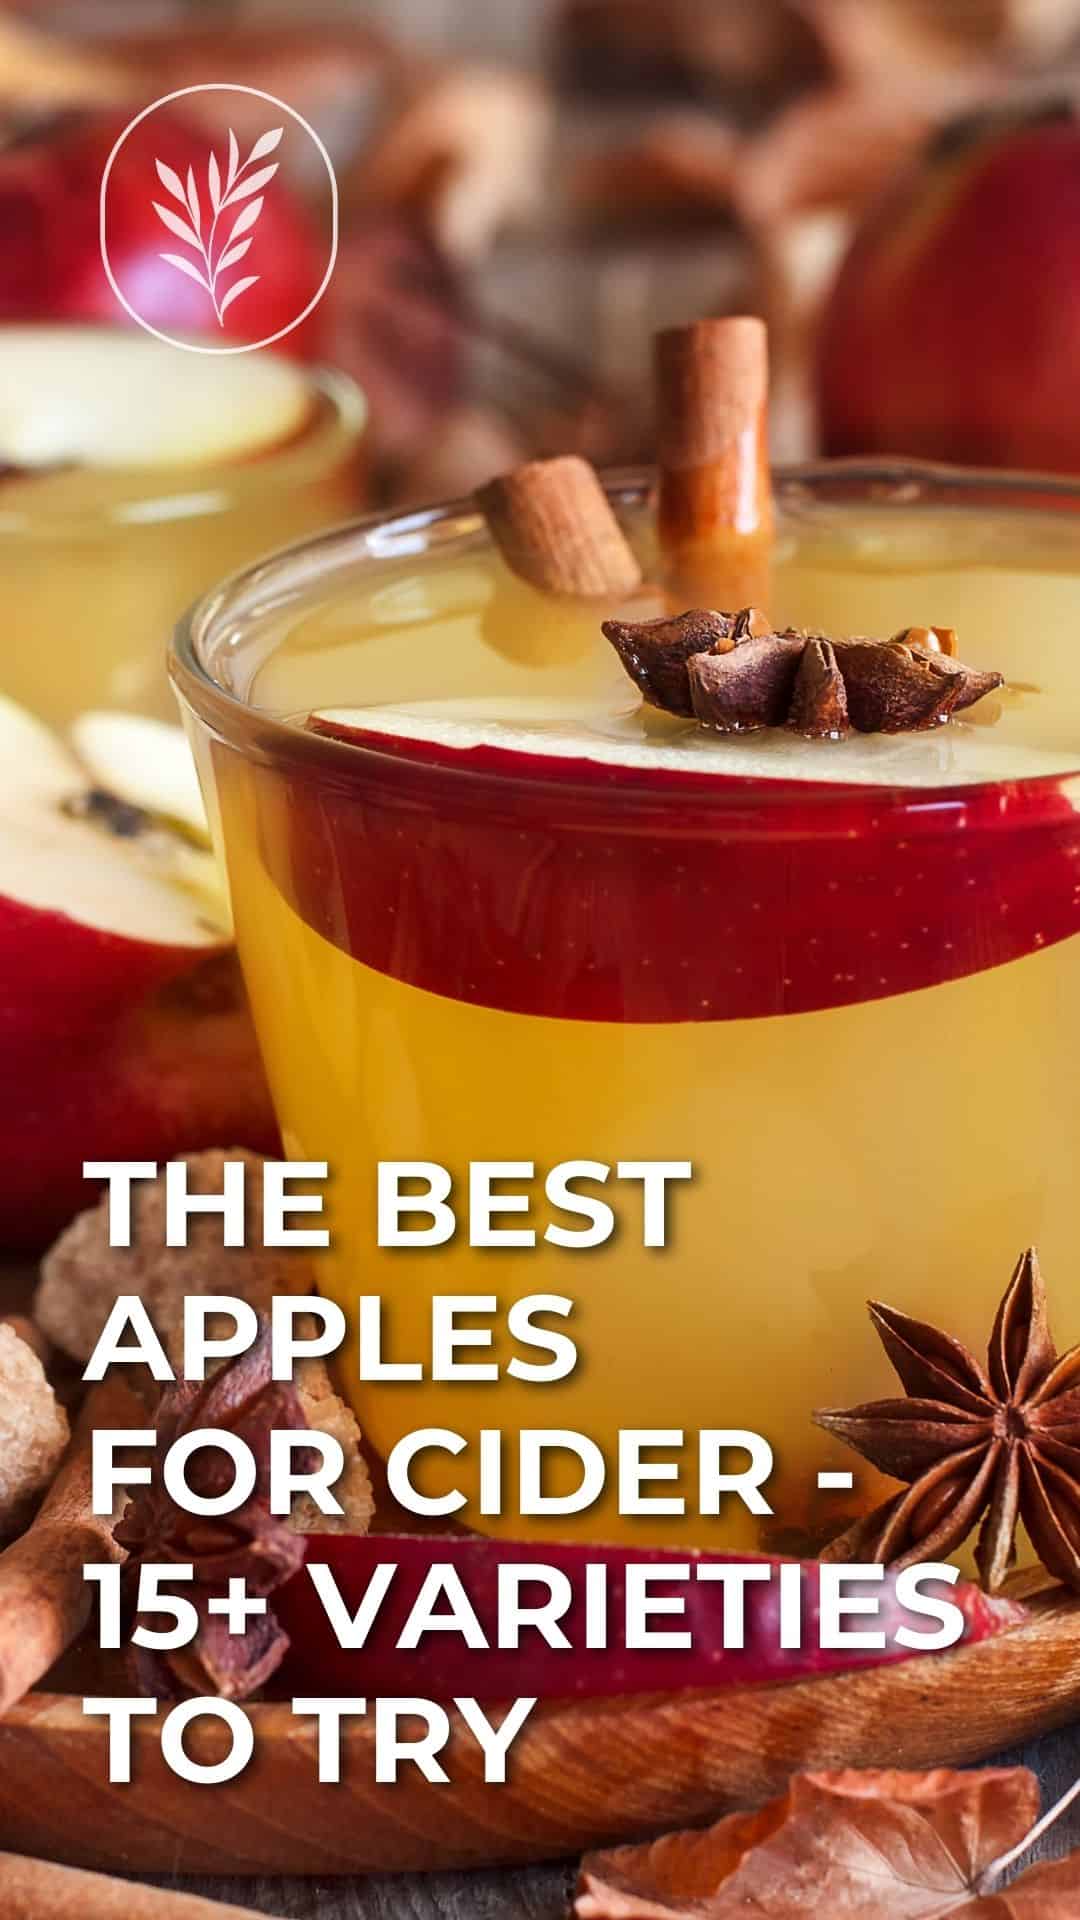 The best apples for cider - 15+ varieties to try - story via @home4theharvest